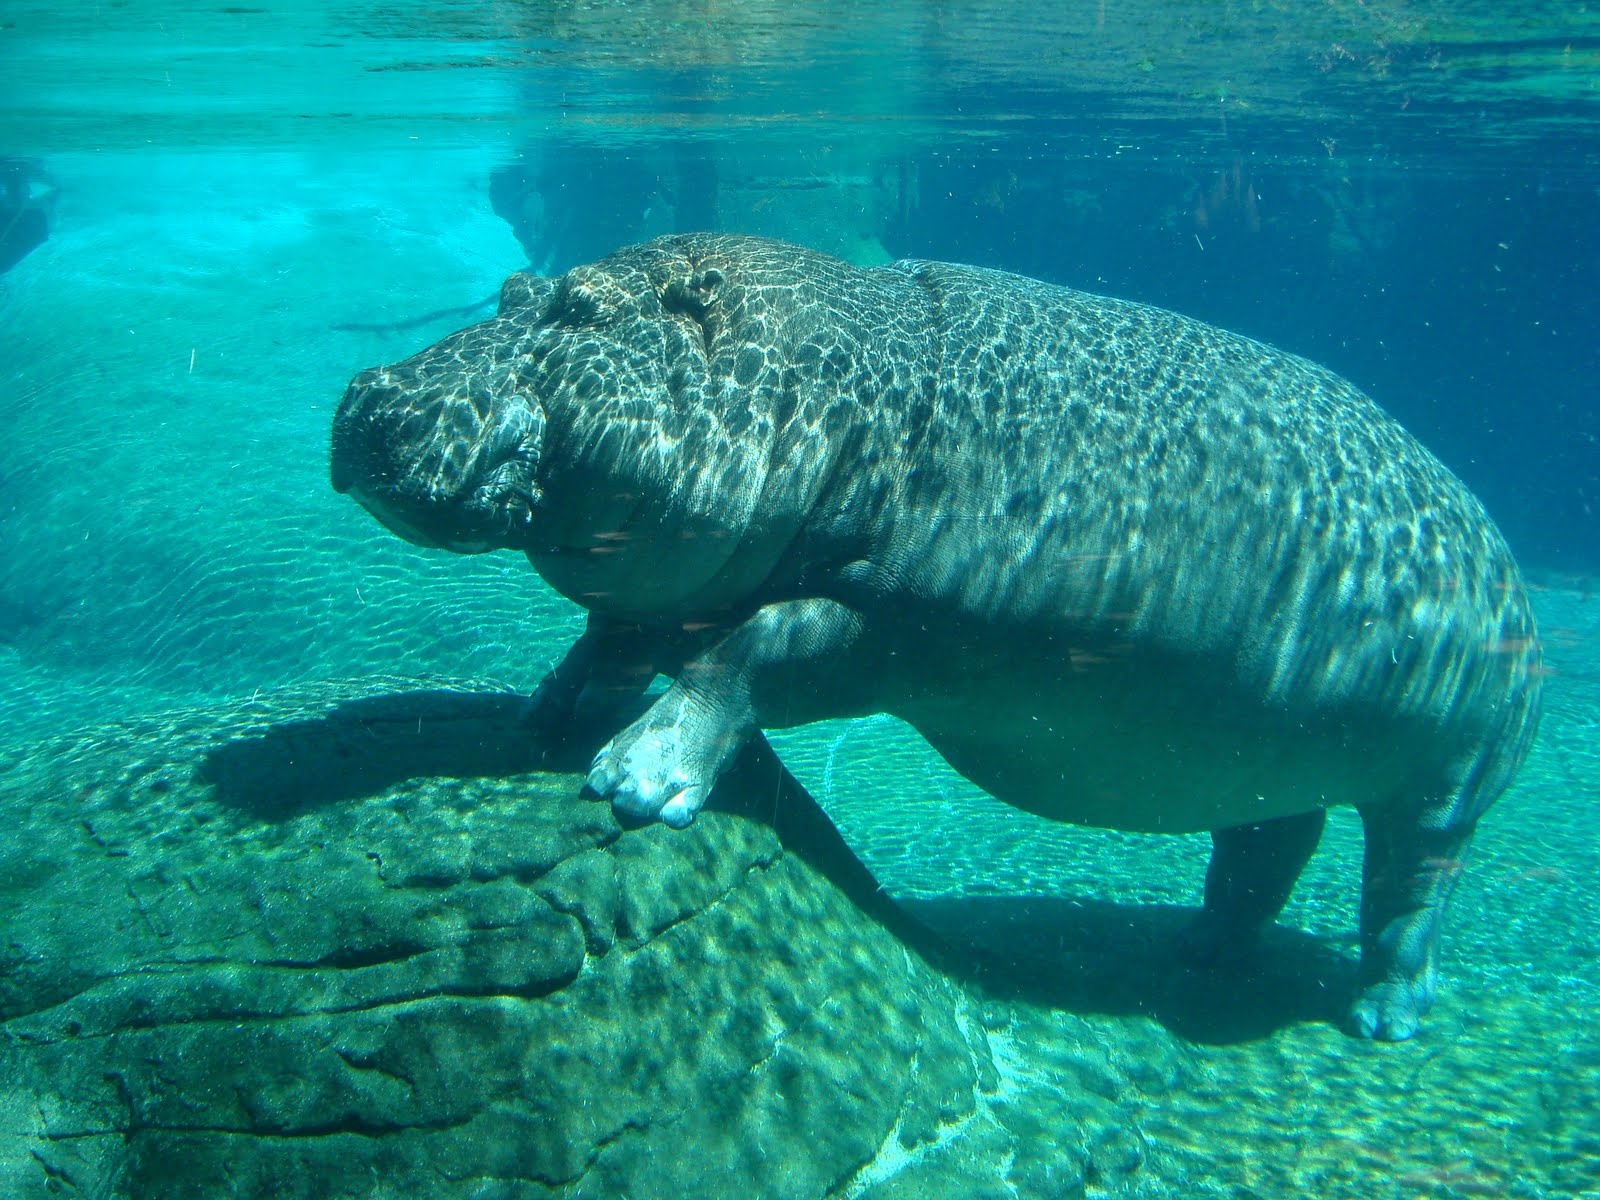 Underwater Hippo Pics And Wallpaper Free download for Desktop | Free ...